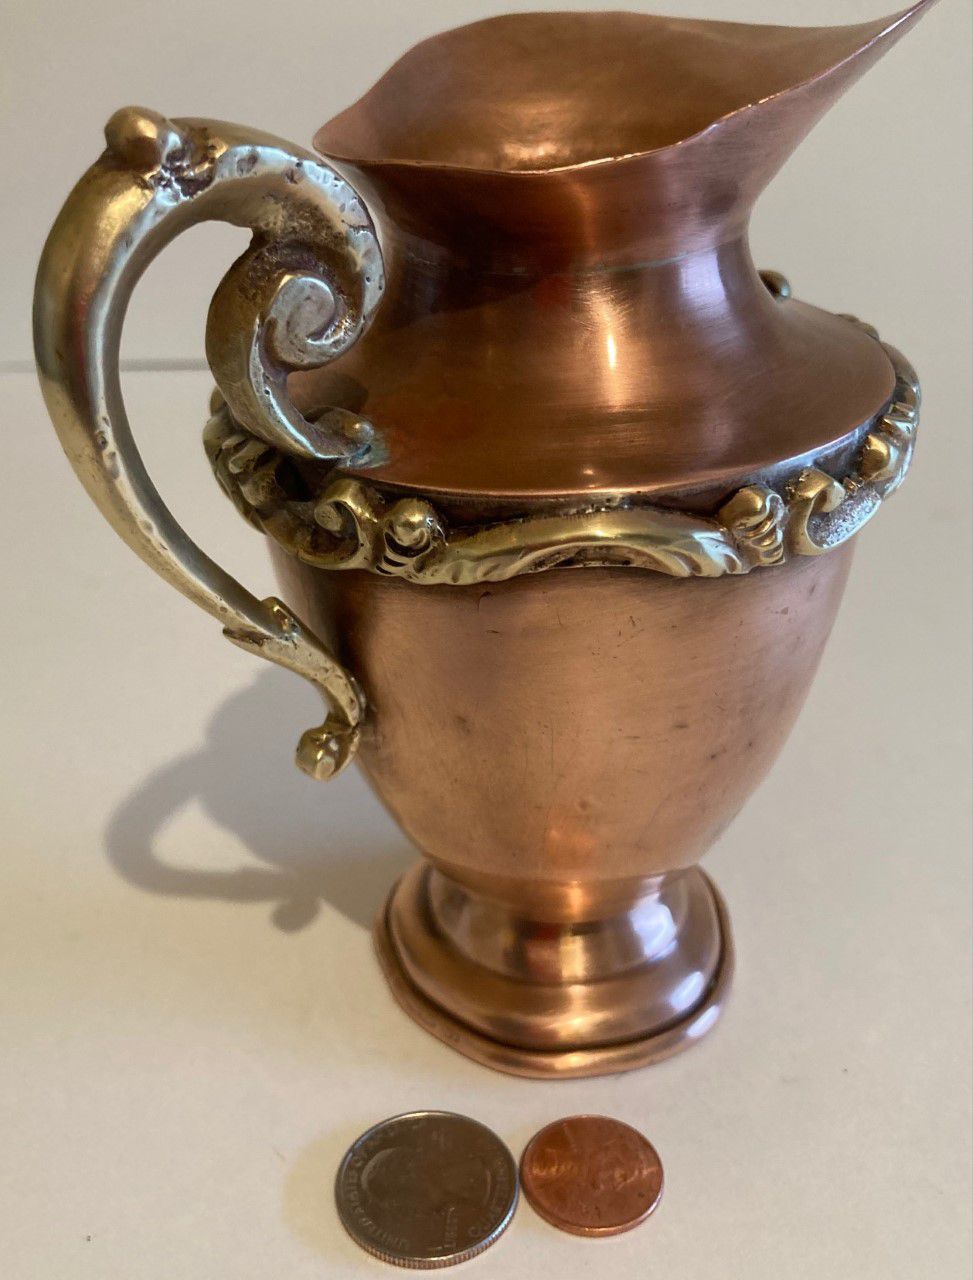 Vintage Copper and Brass Metal Serving Pitcher, 5 1/2" Miniature Picture, Heavy Duty Brass Handle and Trim, Kitchen Decor, Home Decor, Shelf Display